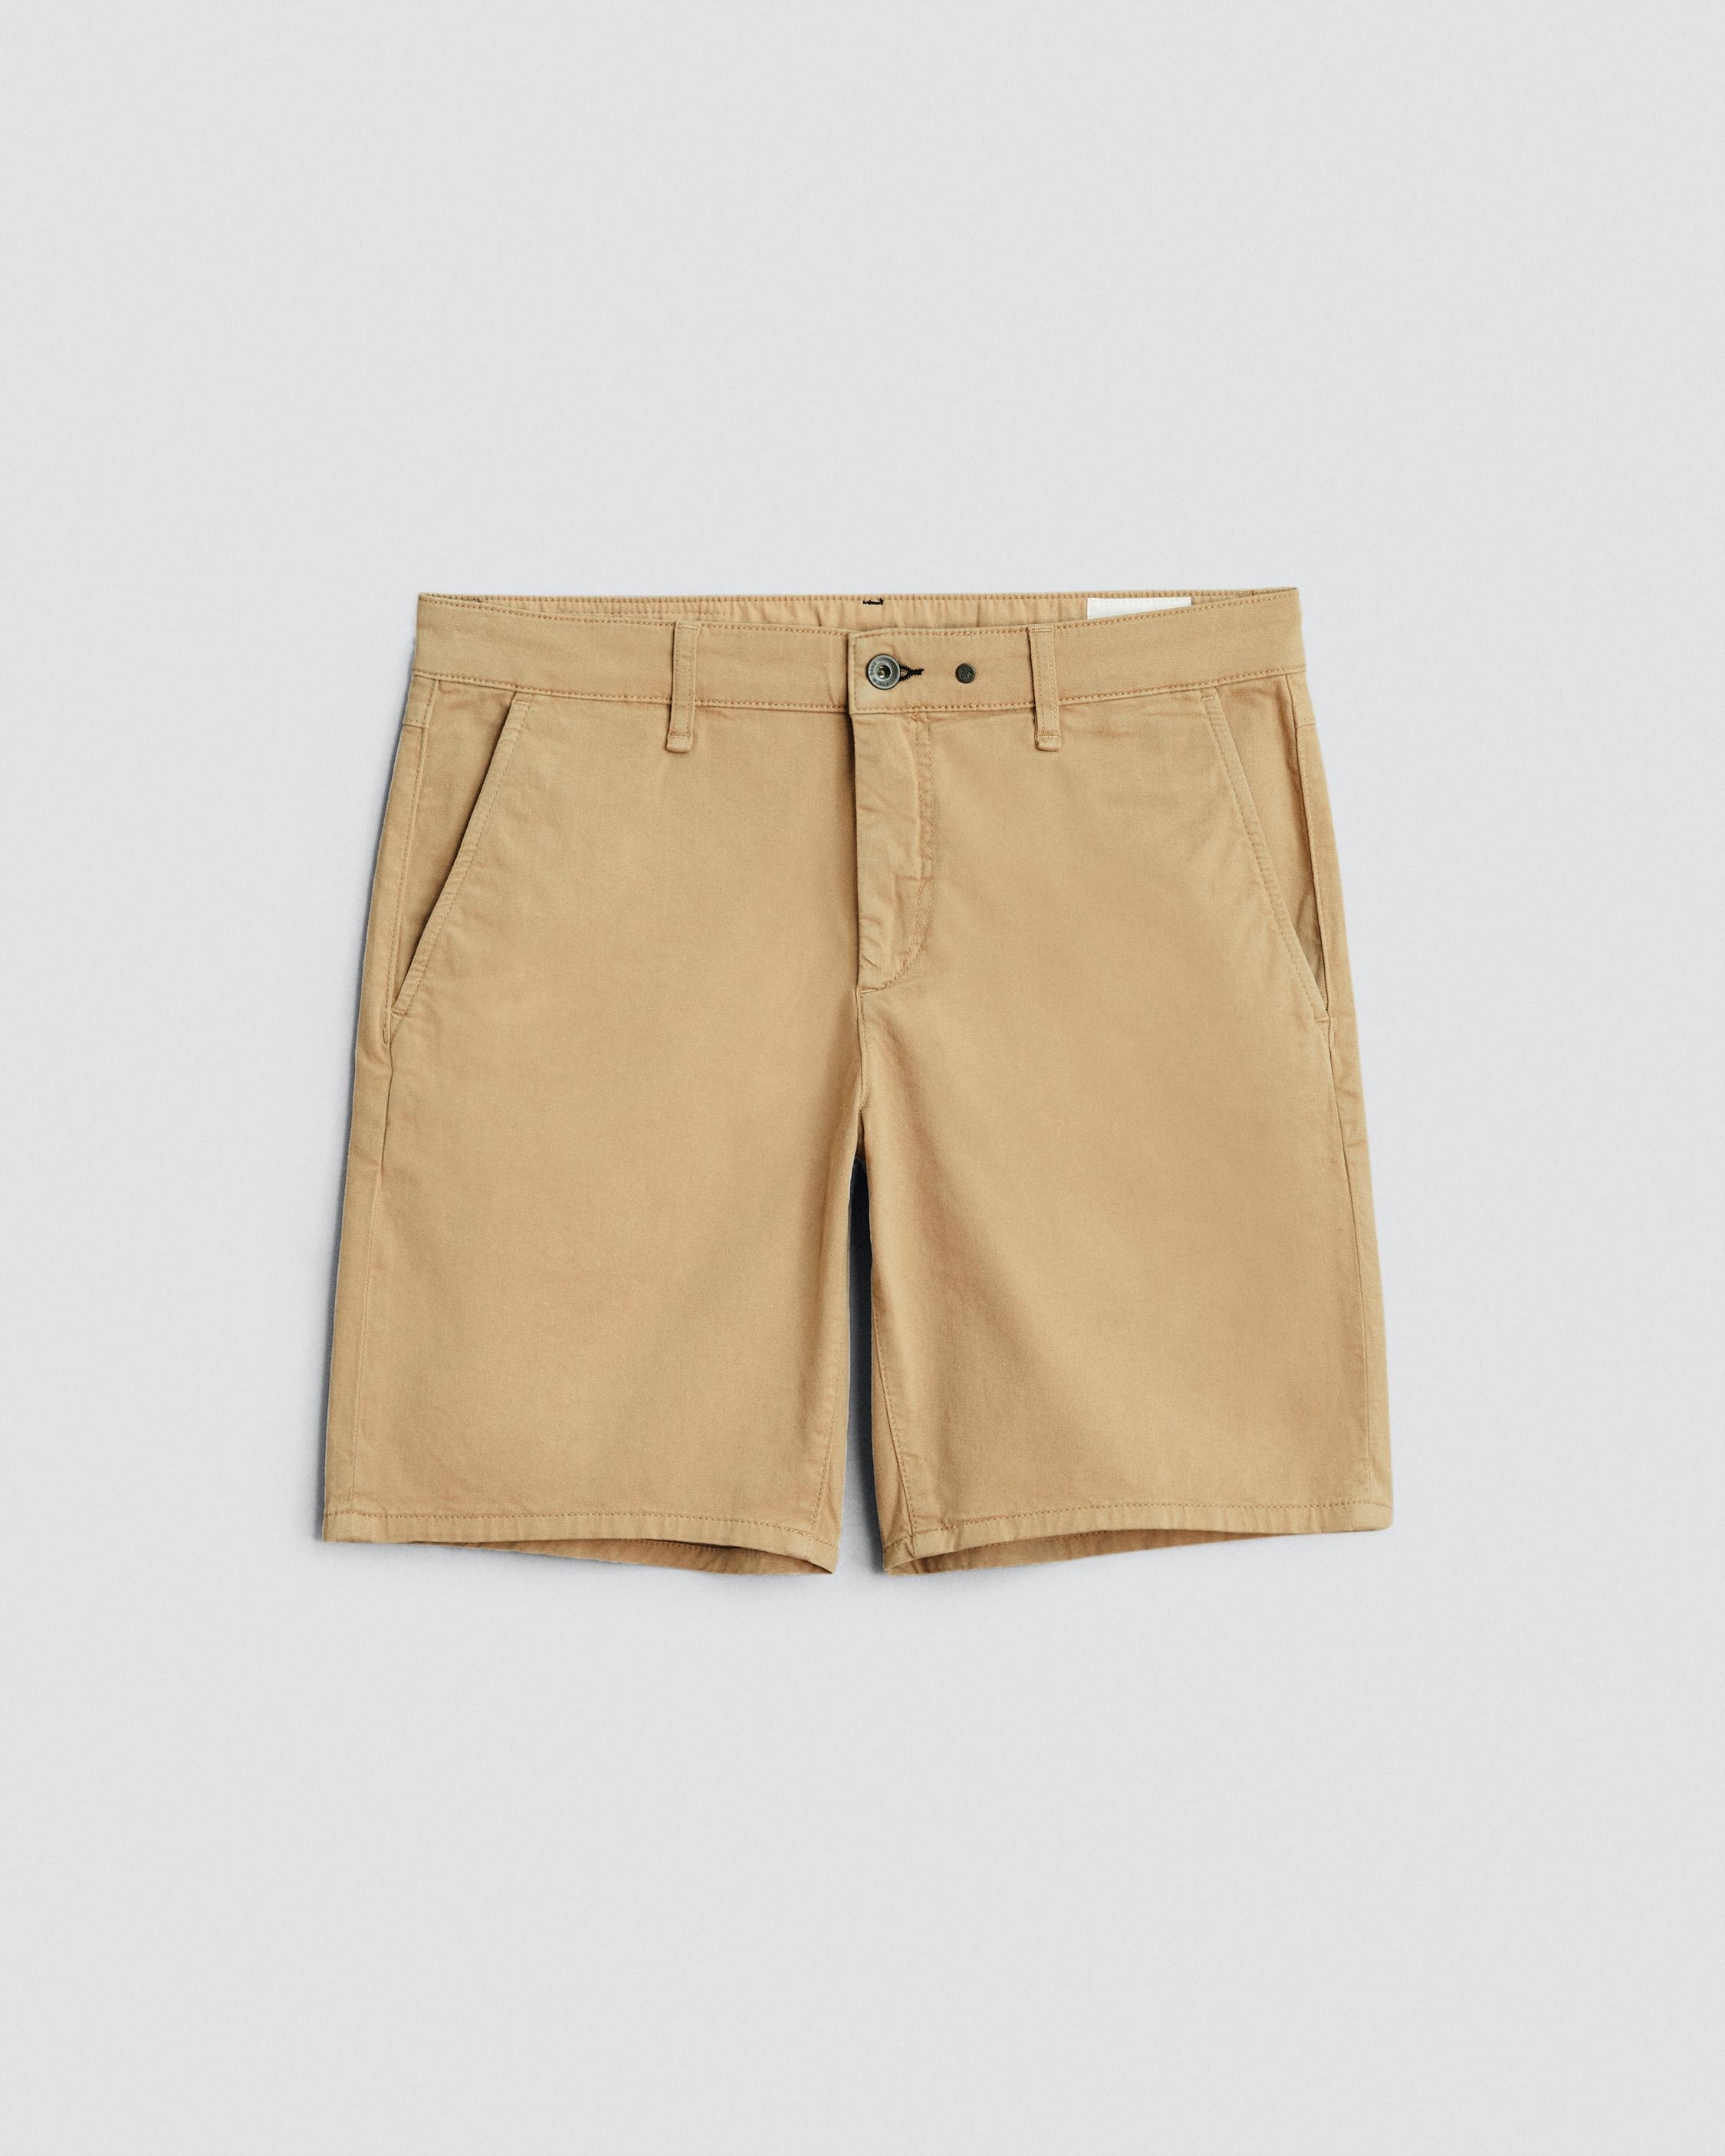 Perry Cotton Stretch Twill Short
Slim Fit Short - 1